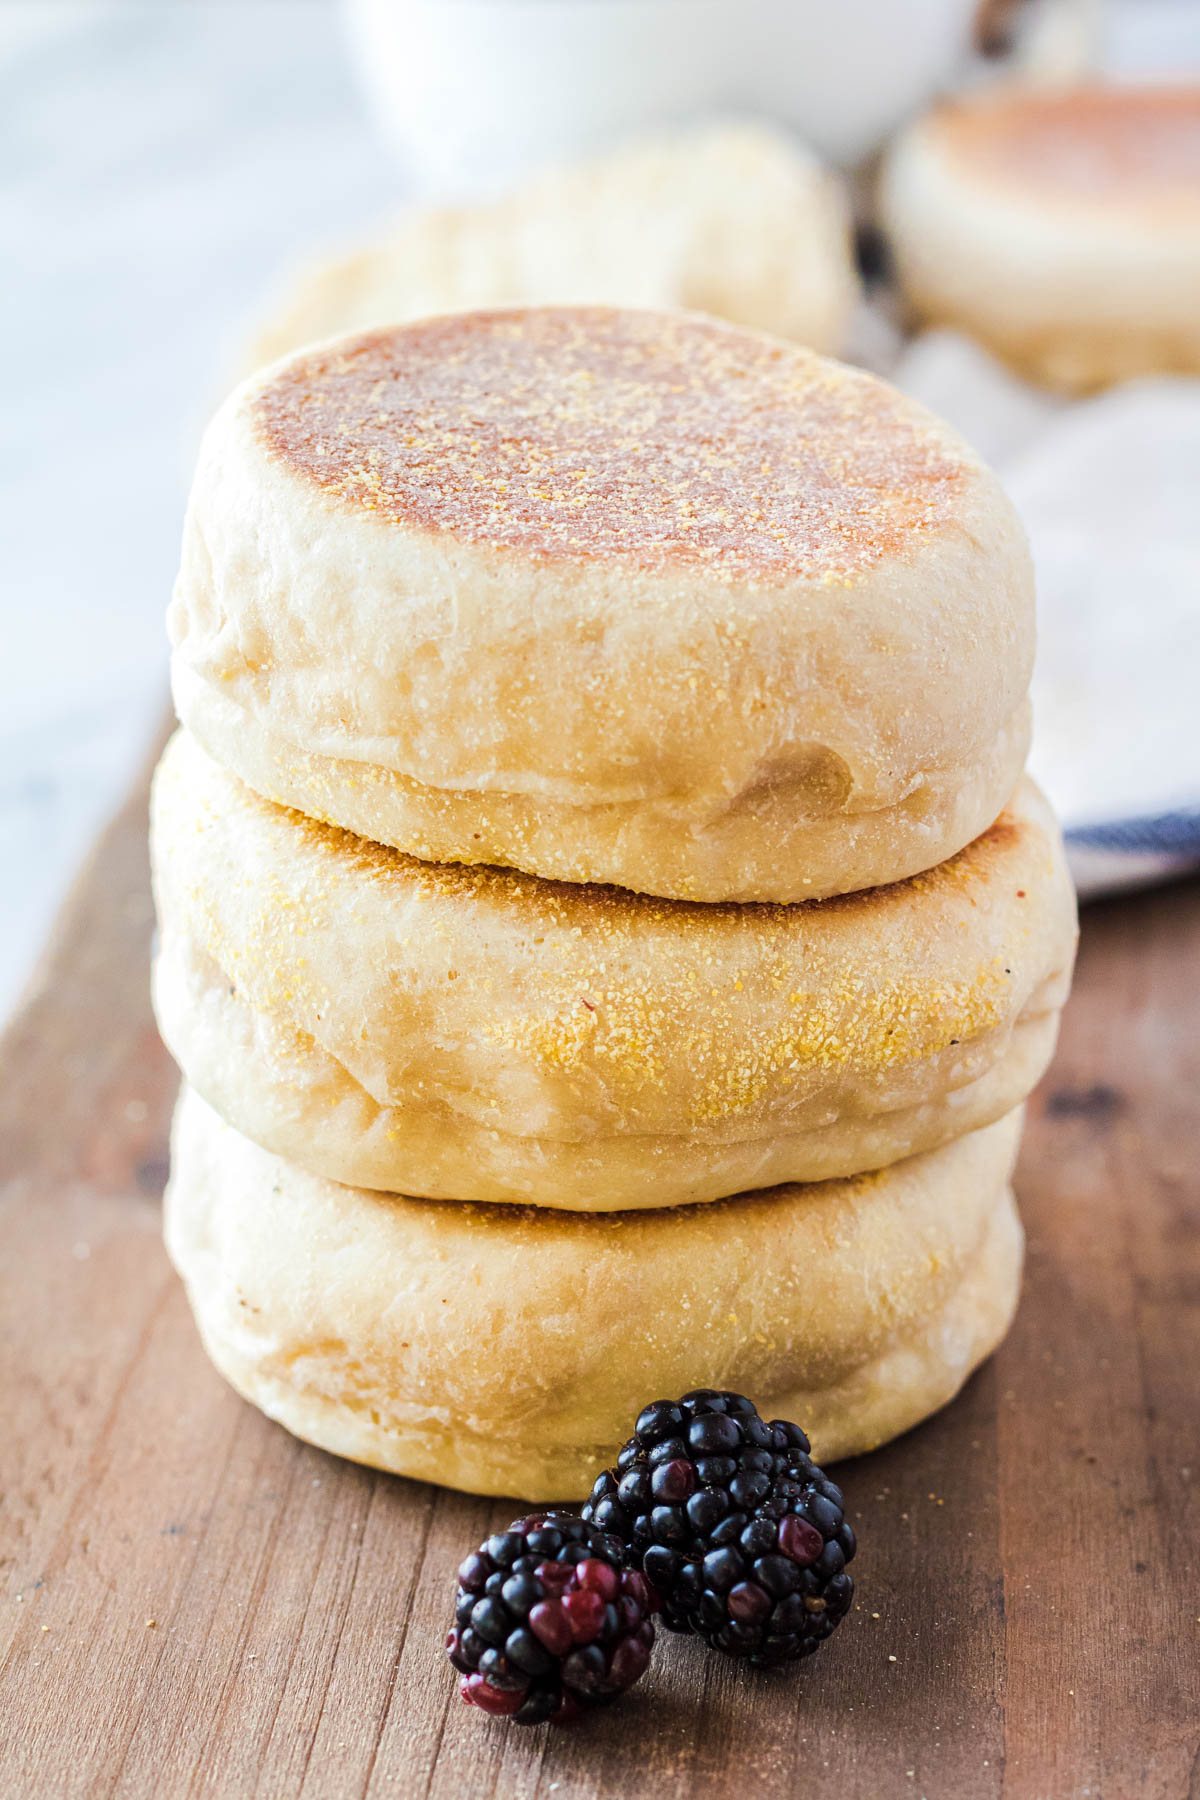 A stack of golden English Muffins.